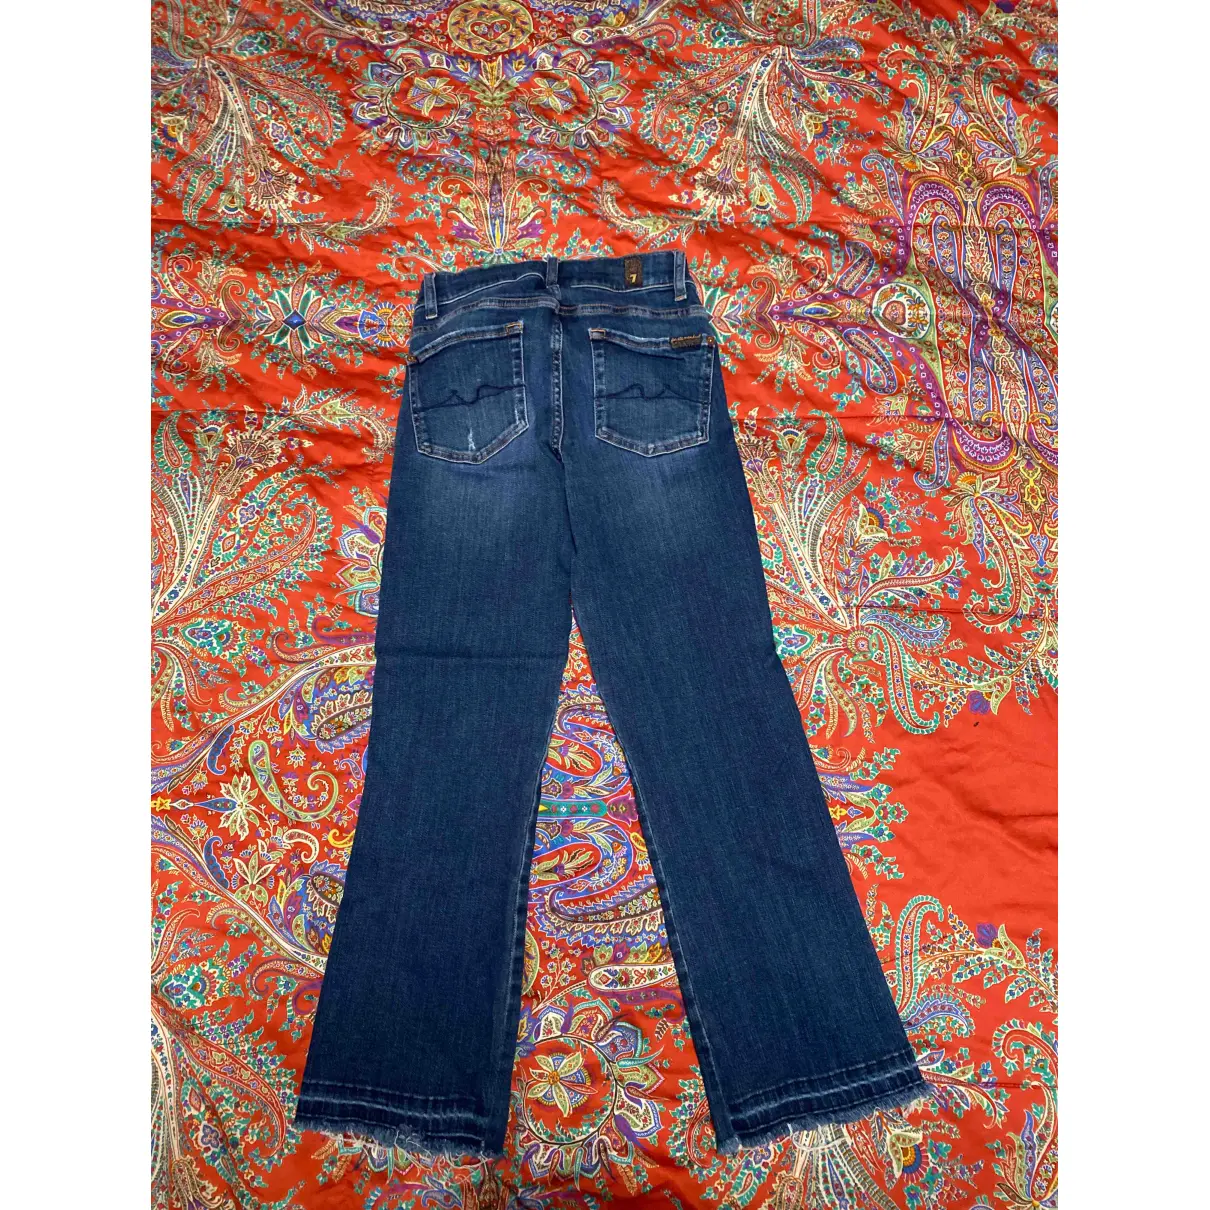 Buy 7 For All Mankind Large pants online